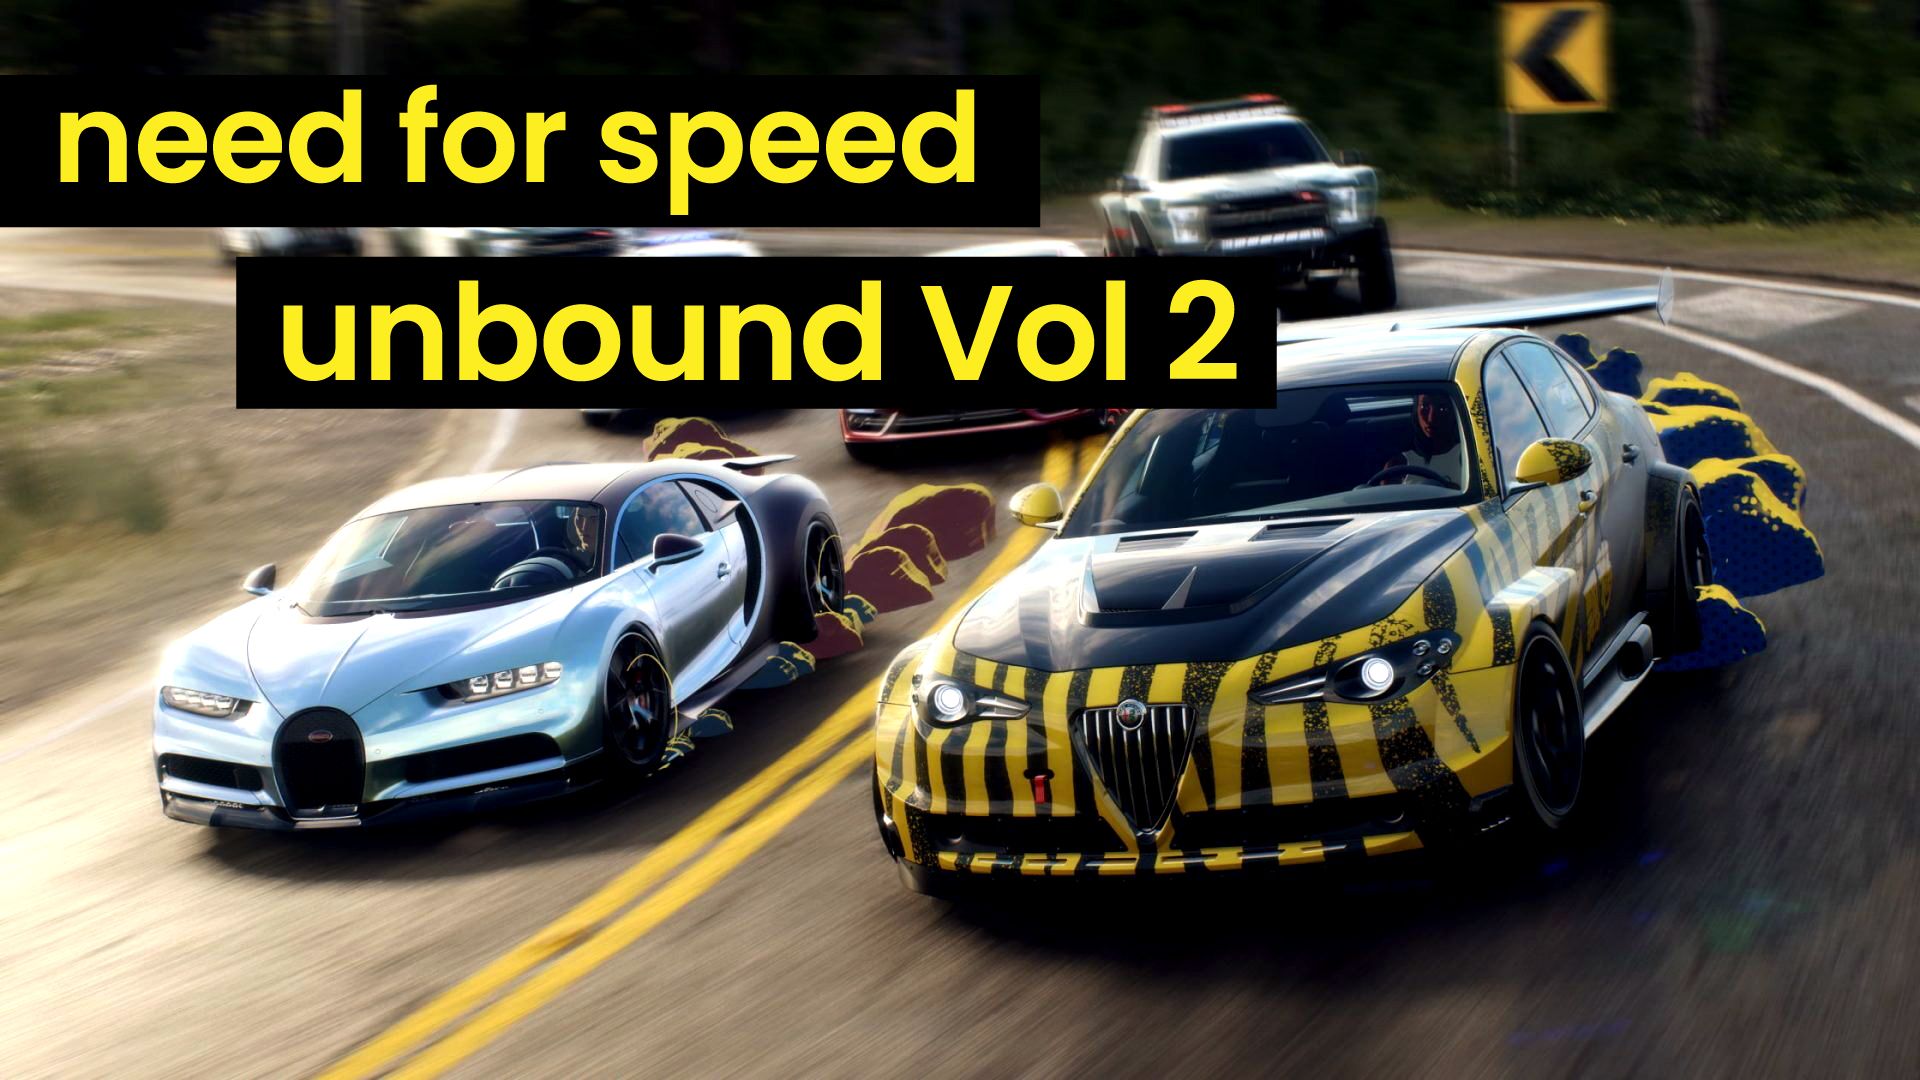 The Ultimate Driving Experience! Need for Speed Unbound Vol 2 Update